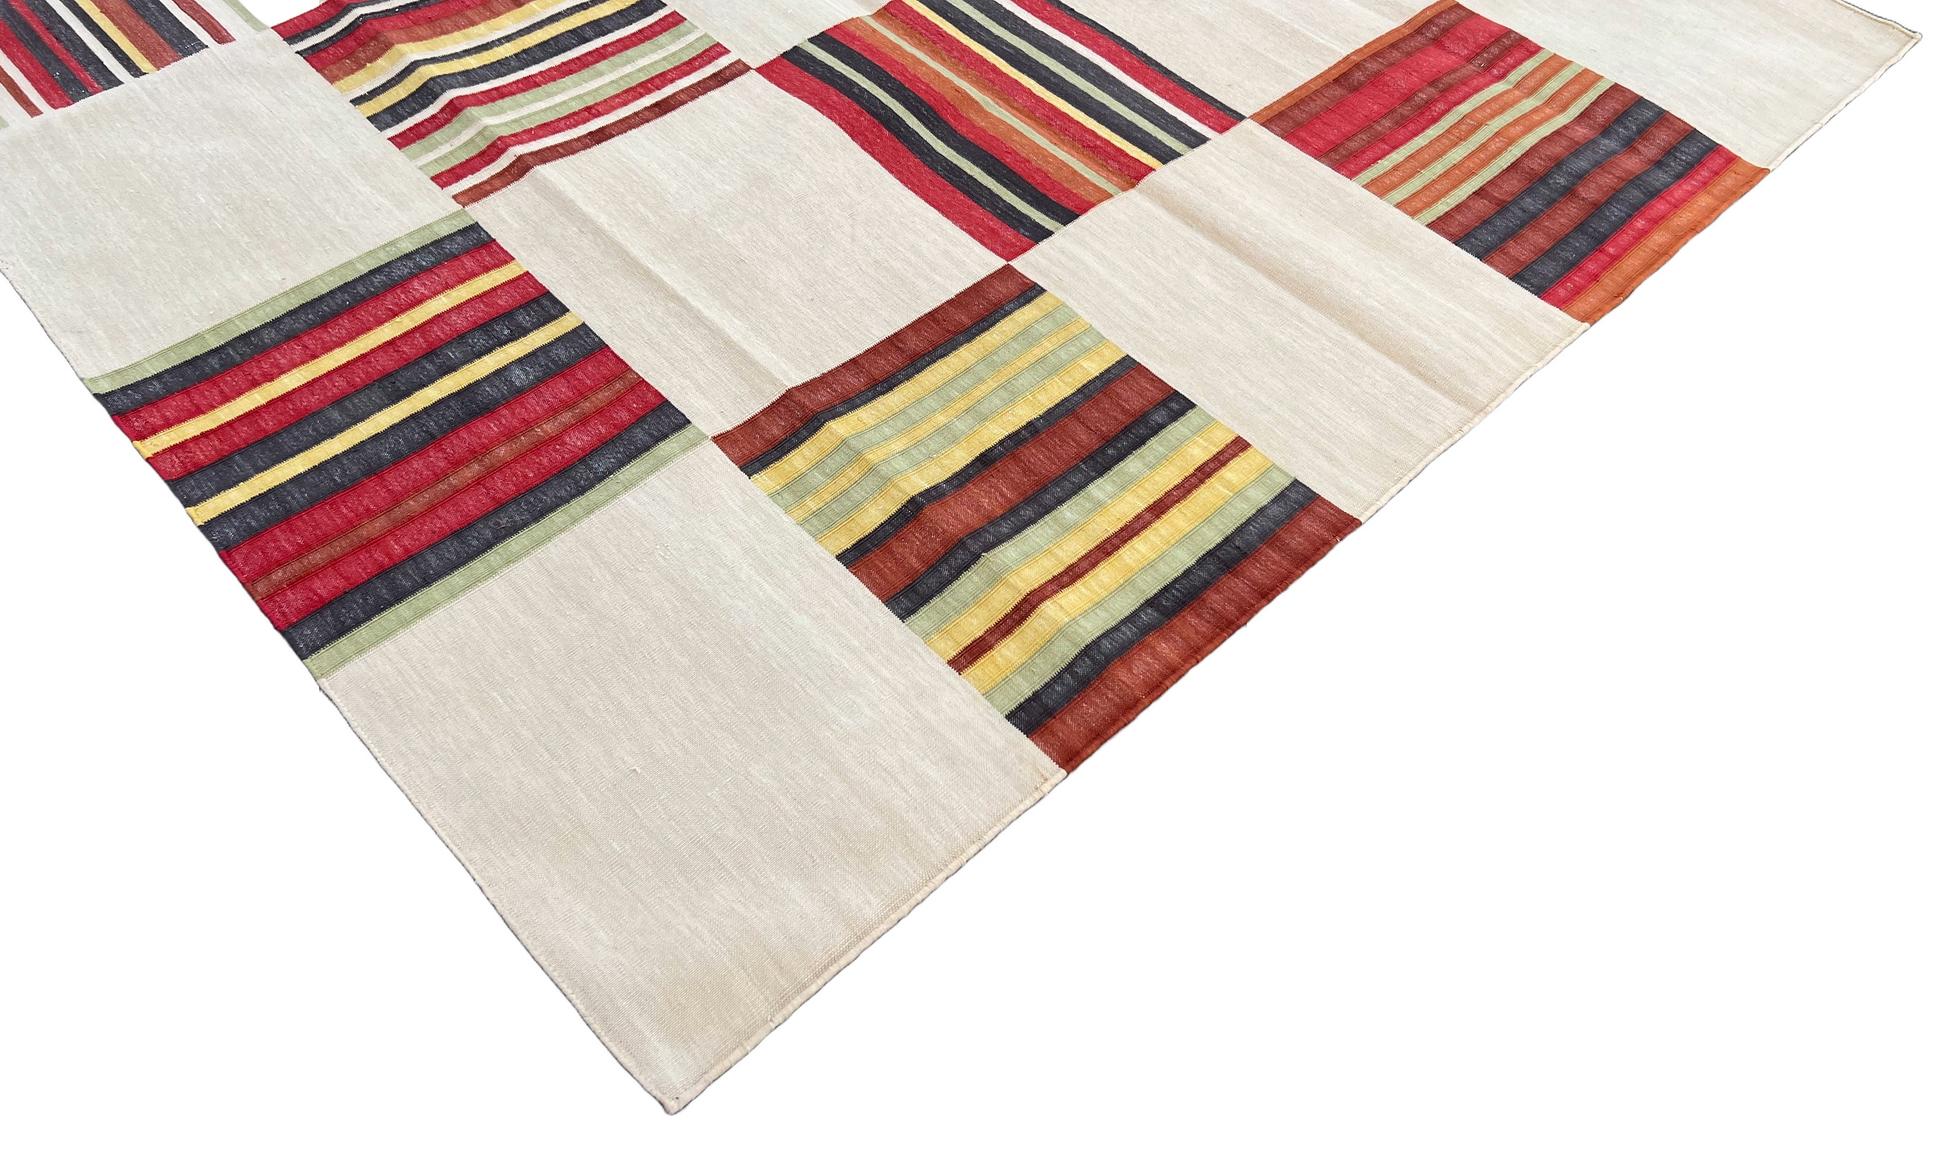 Cotton Vegetable Dyed Beige And Red Multi Color Striped Indian Dhurrie Rug-6'x8' 

These special flat-weave dhurries are hand-woven with 15 ply 100% cotton yarn. Due to the special manufacturing techniques used to create our rugs, the size and color